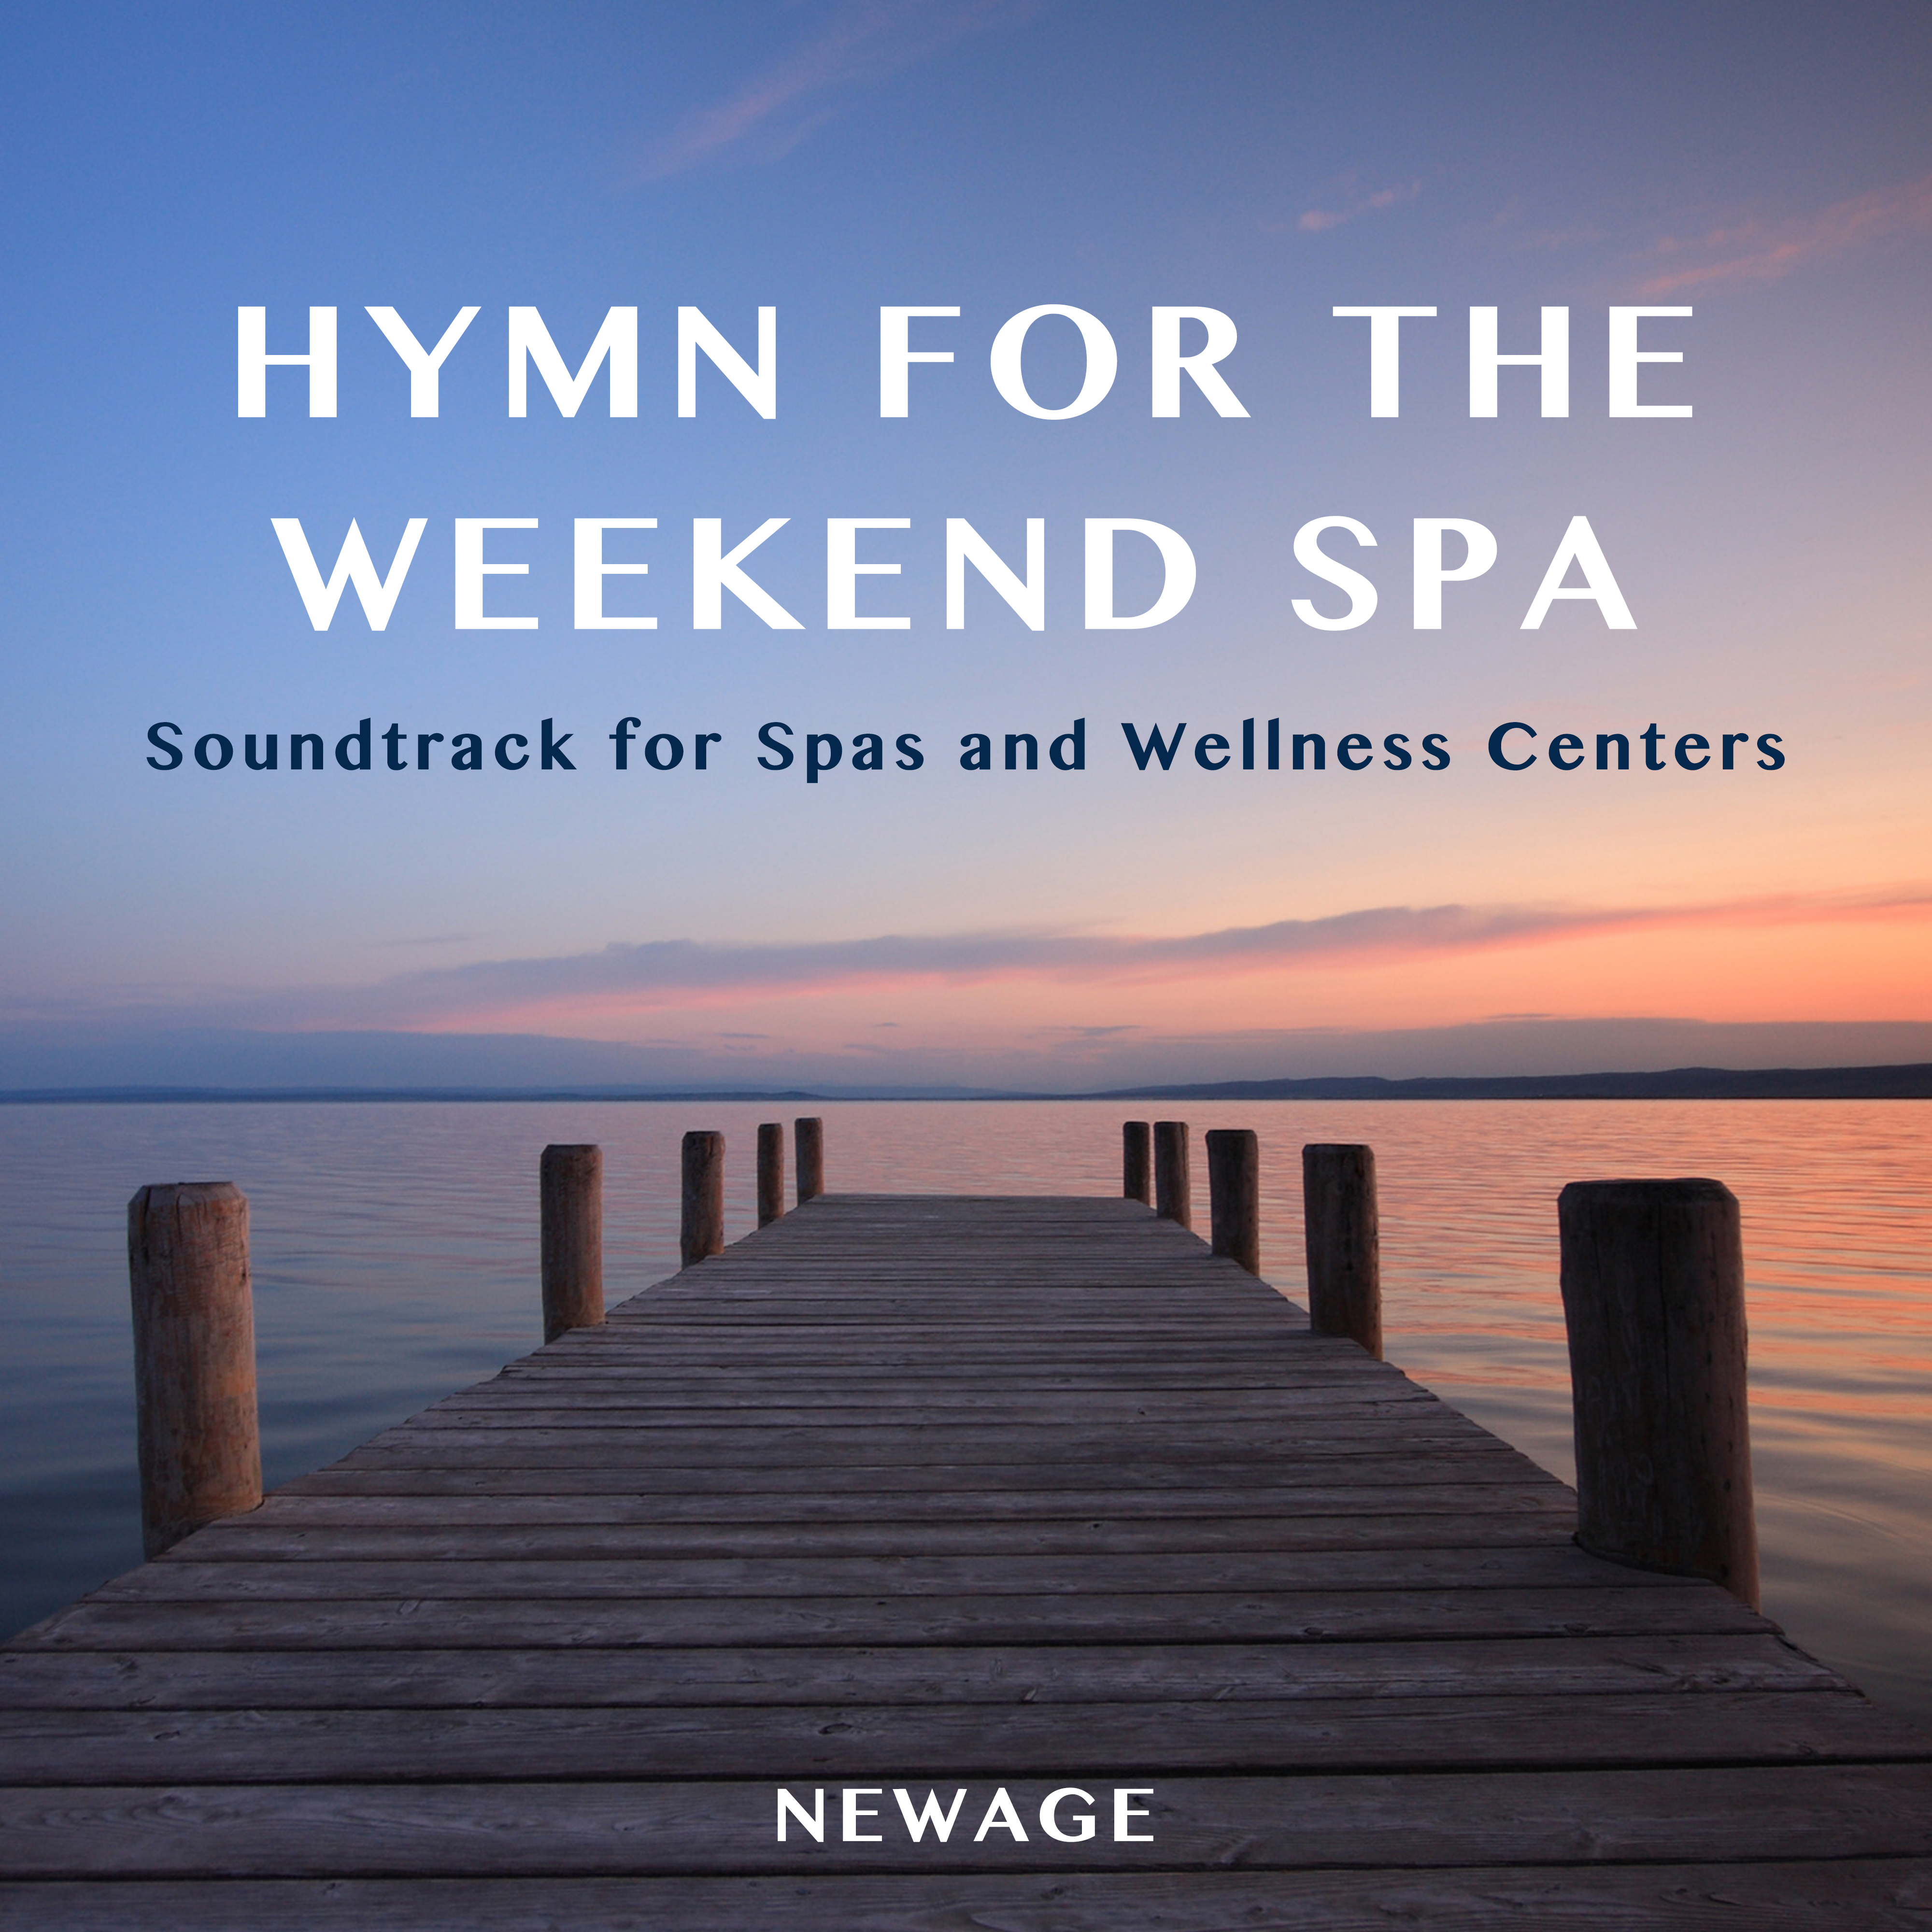 Hymn for the Weekend Spa - The Soundtrack for Spas and Wellness Centers